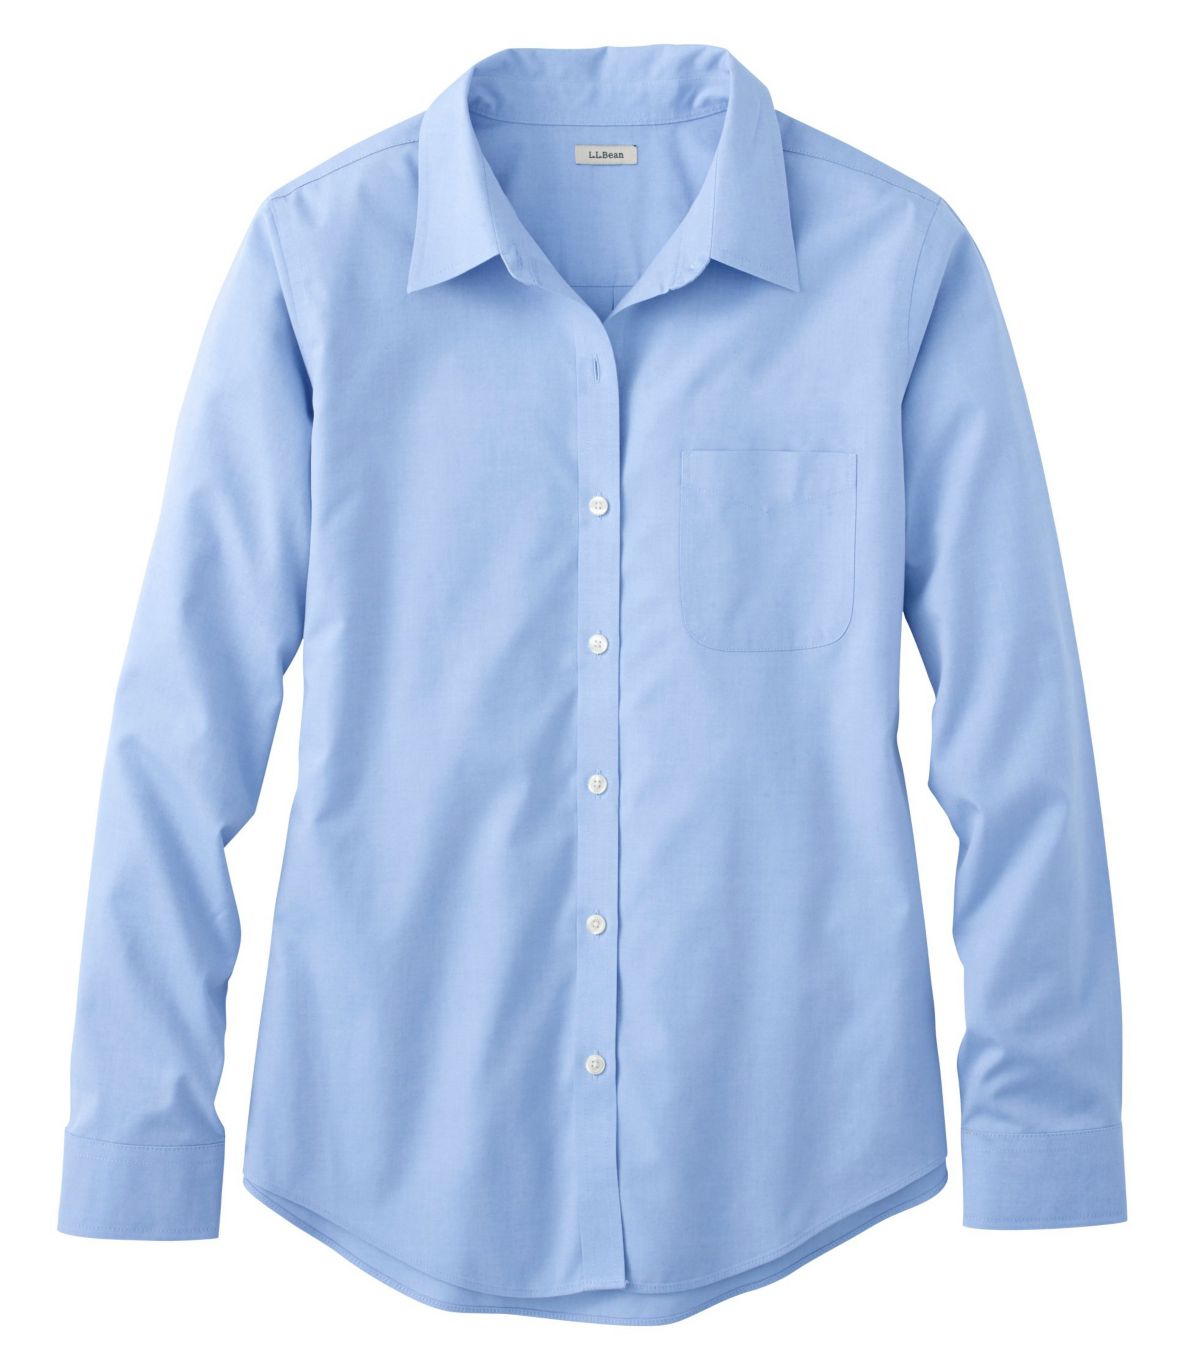 Women's Wrinkle-Free Pinpoint Oxford Shirt, Long-Sleeve